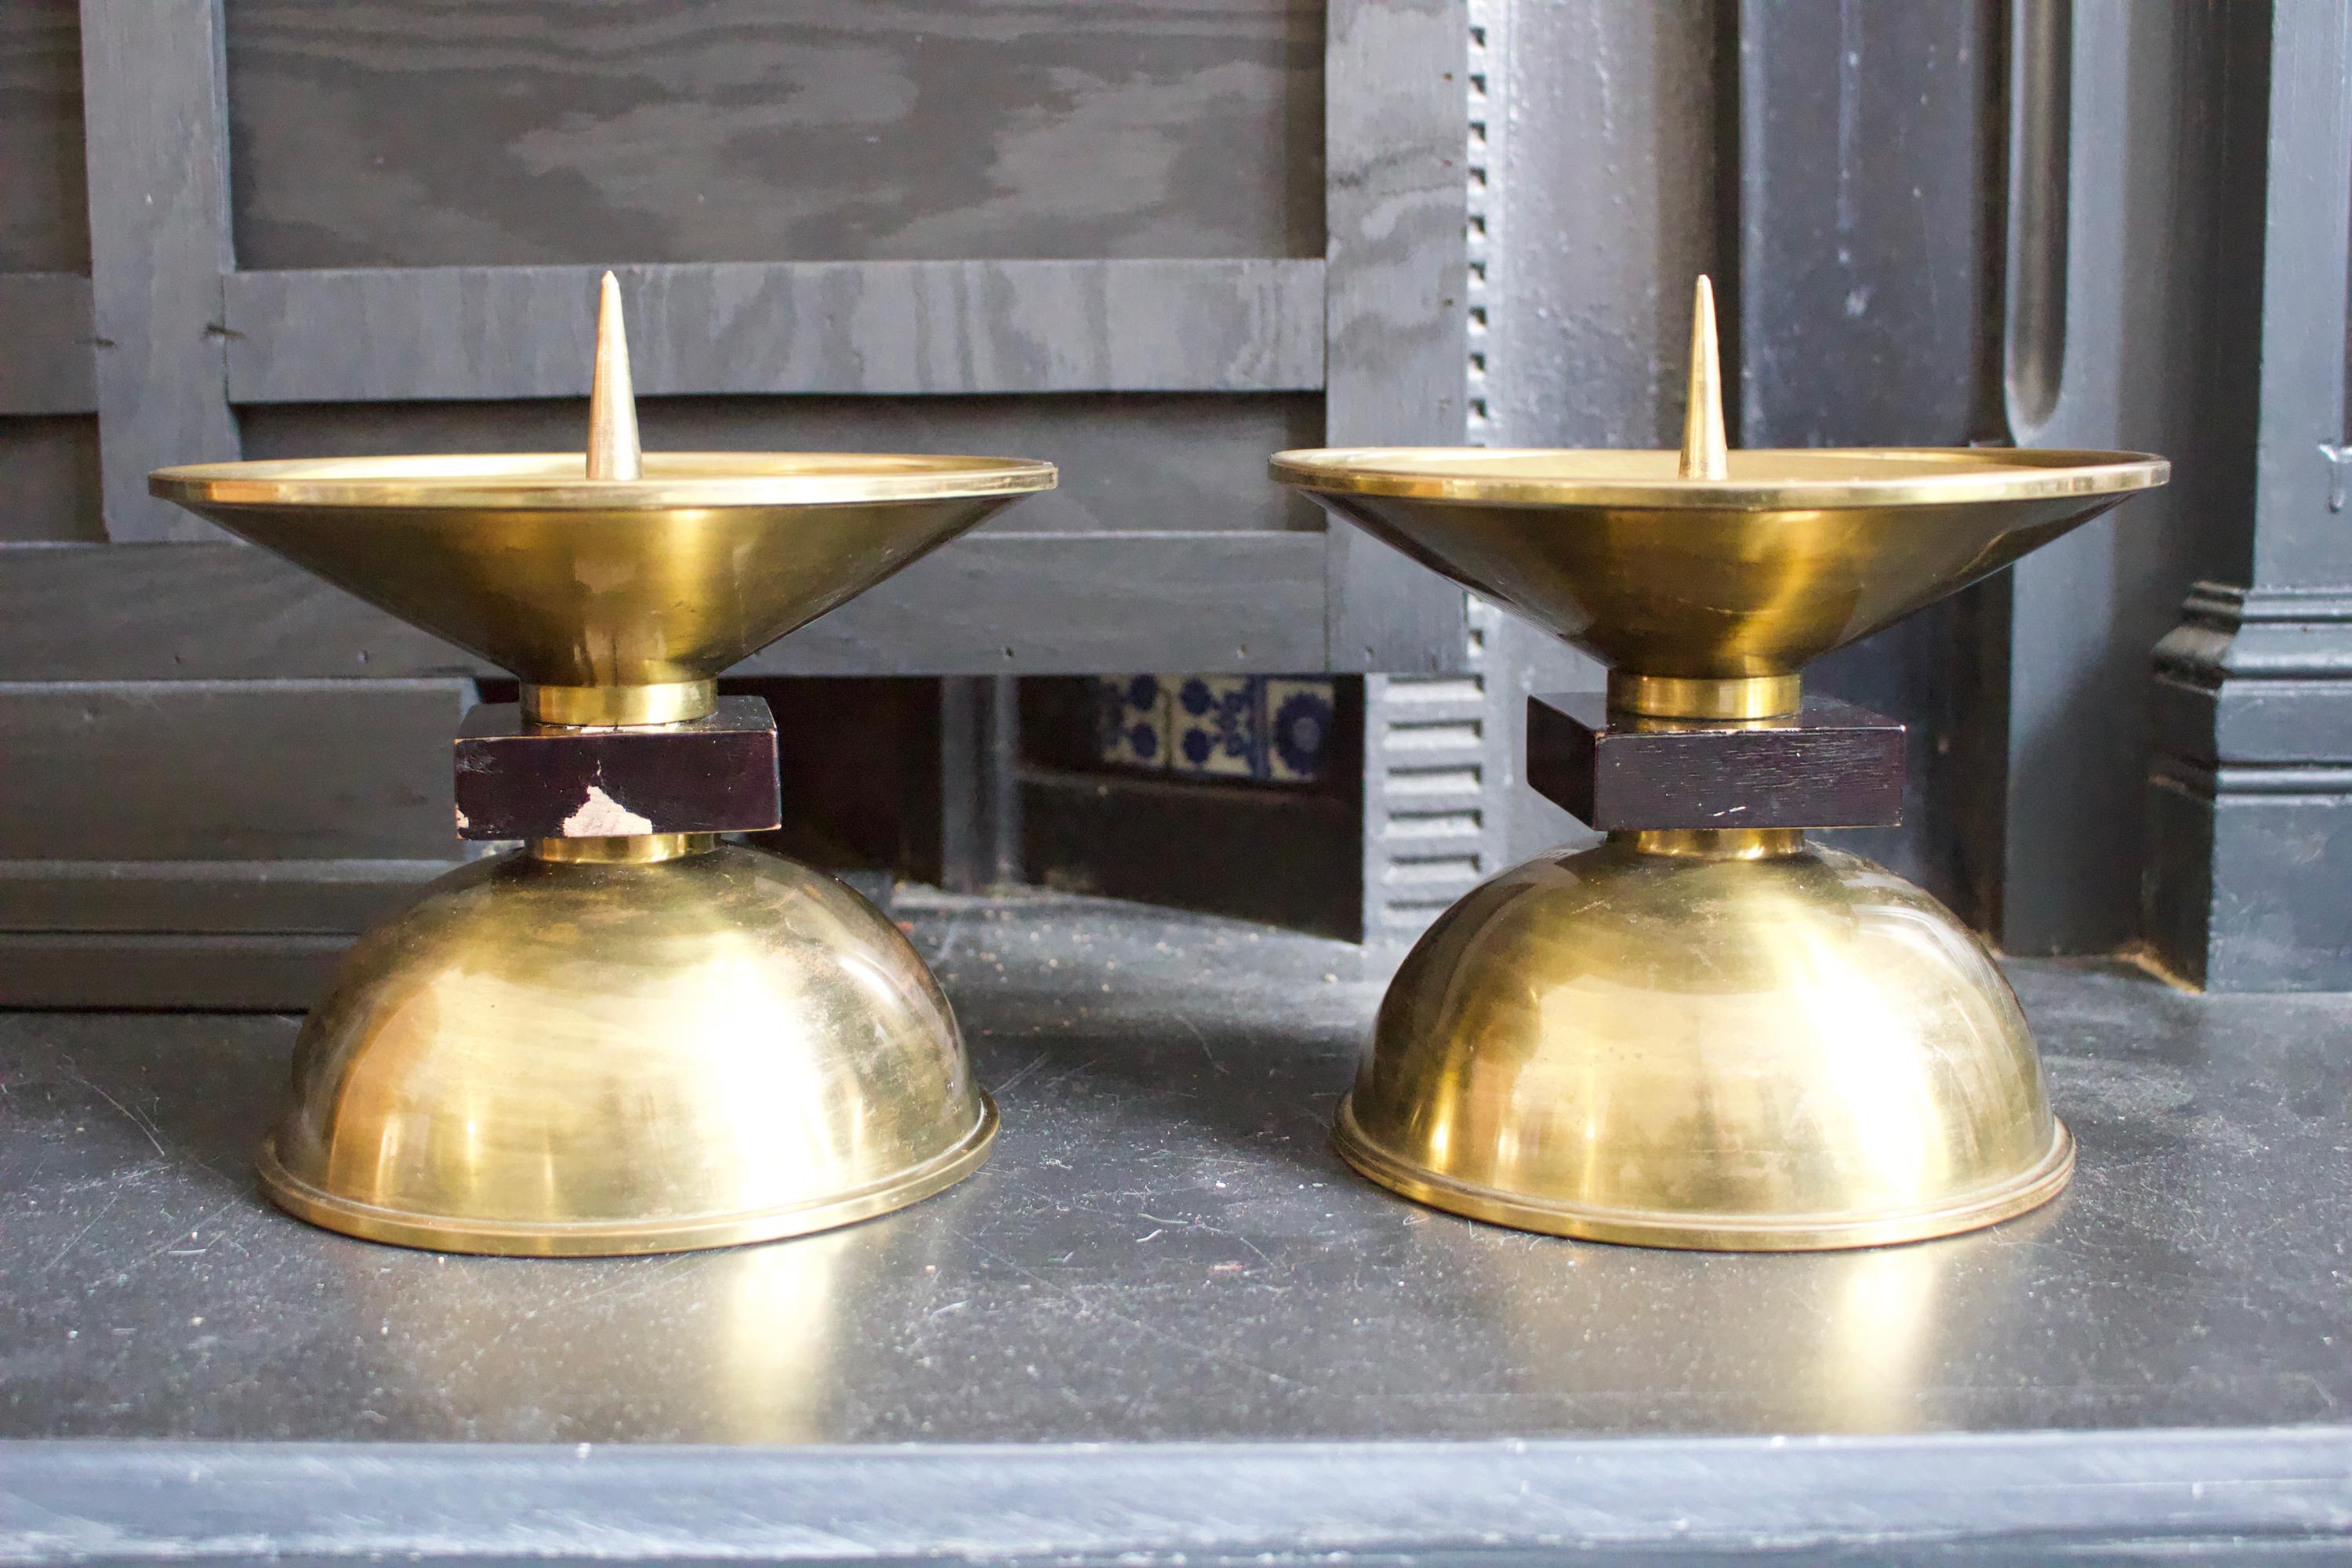 A pair of large candleholders with wood detail on the stem, early to Mid-20th Century. European, found in Germany, designer unknown. 

These pieces are nicely made of spun brass and wood, each with a separate brass dish which rests in the top and